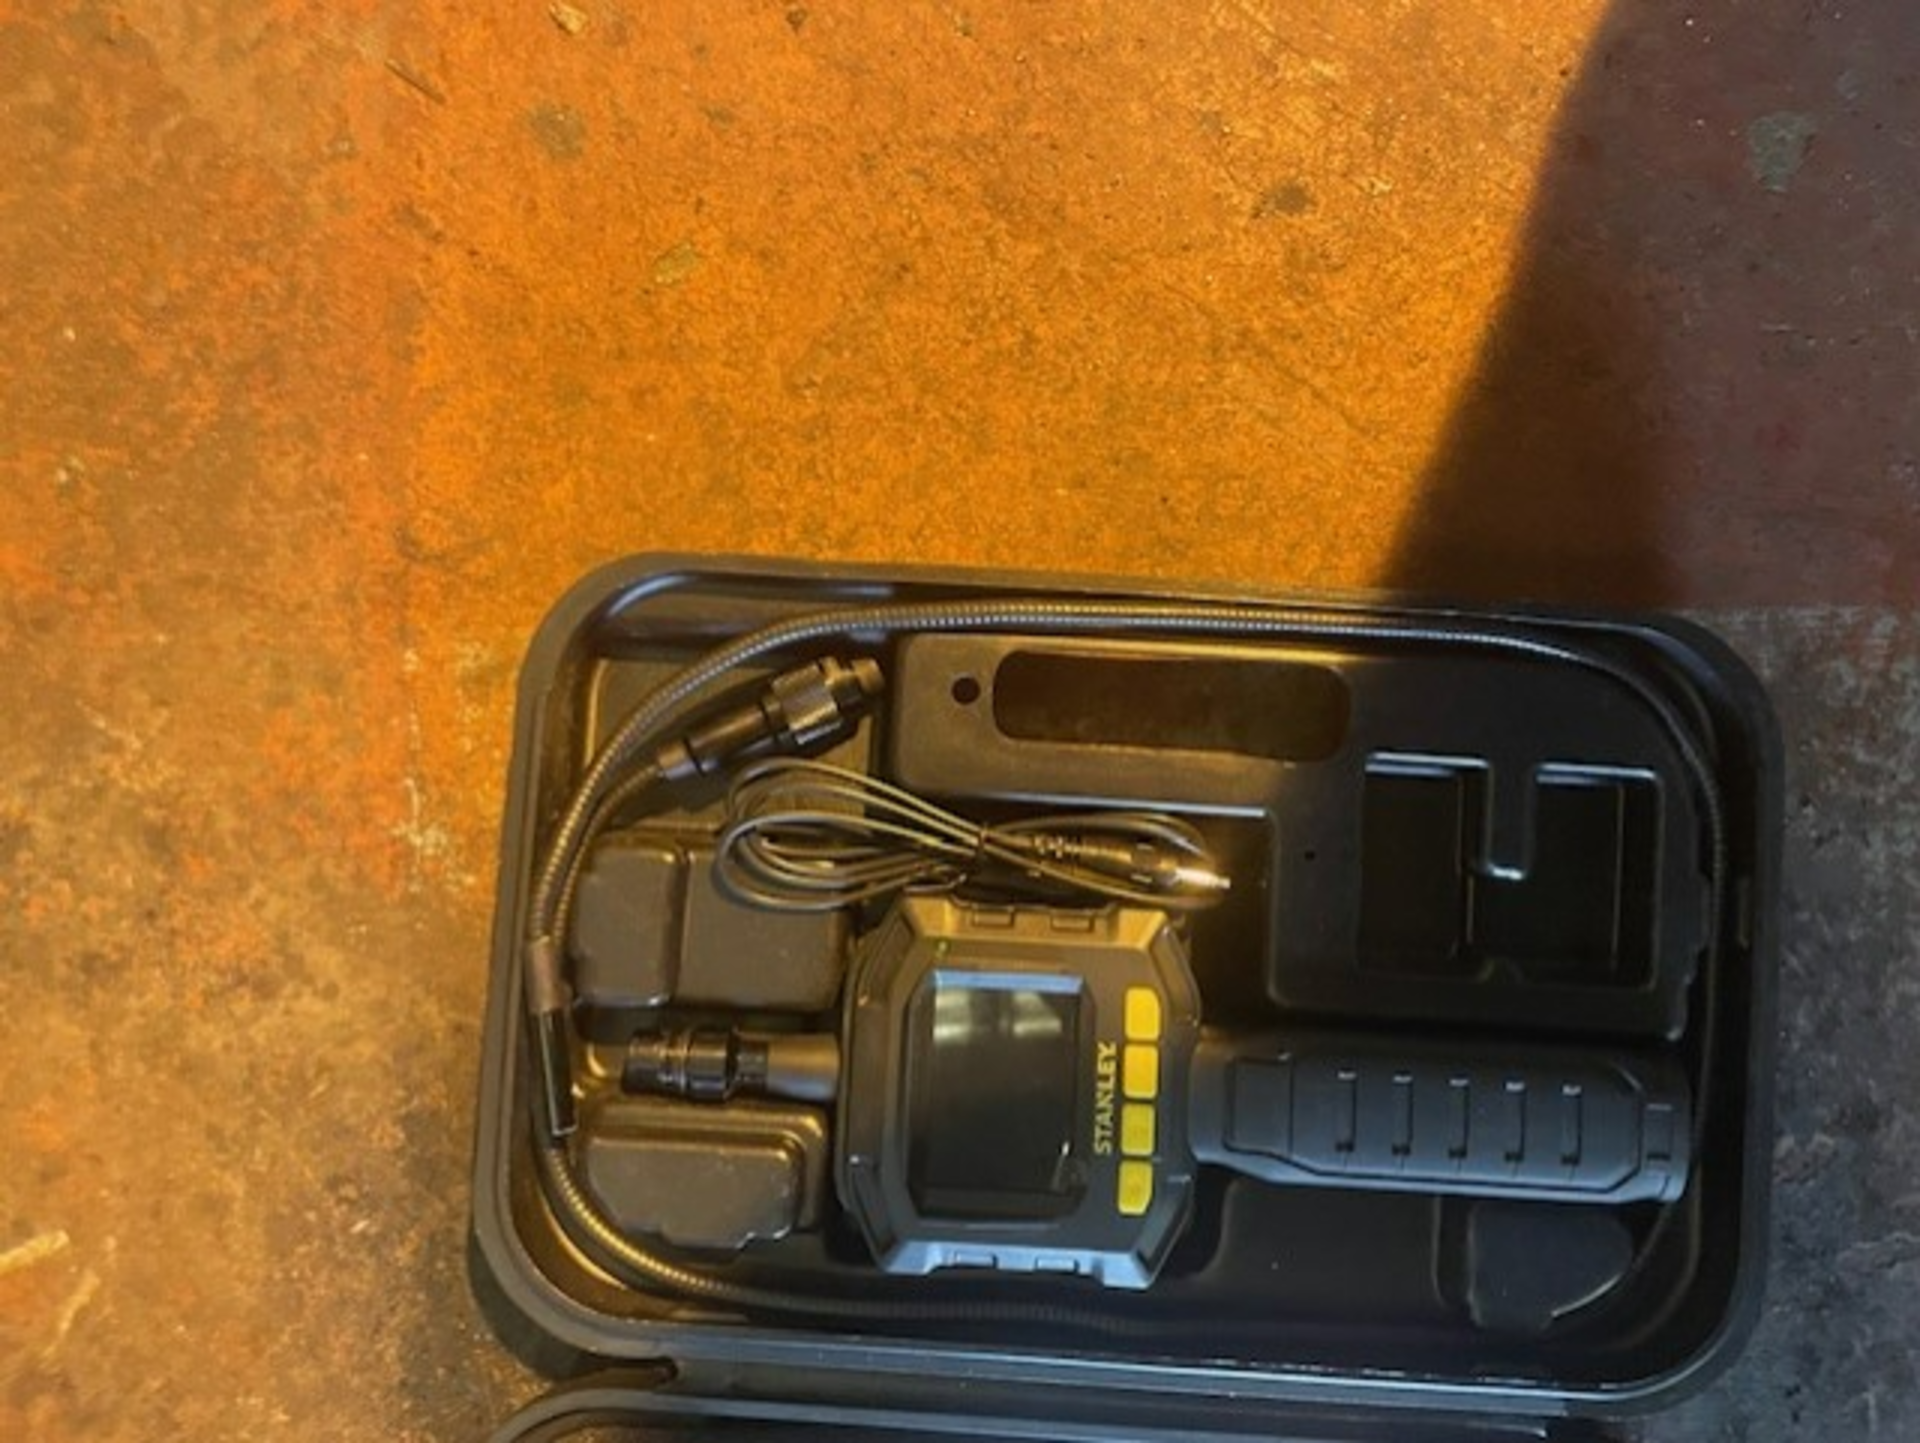 Inspection camera like brand new inside box very clean - Image 3 of 3